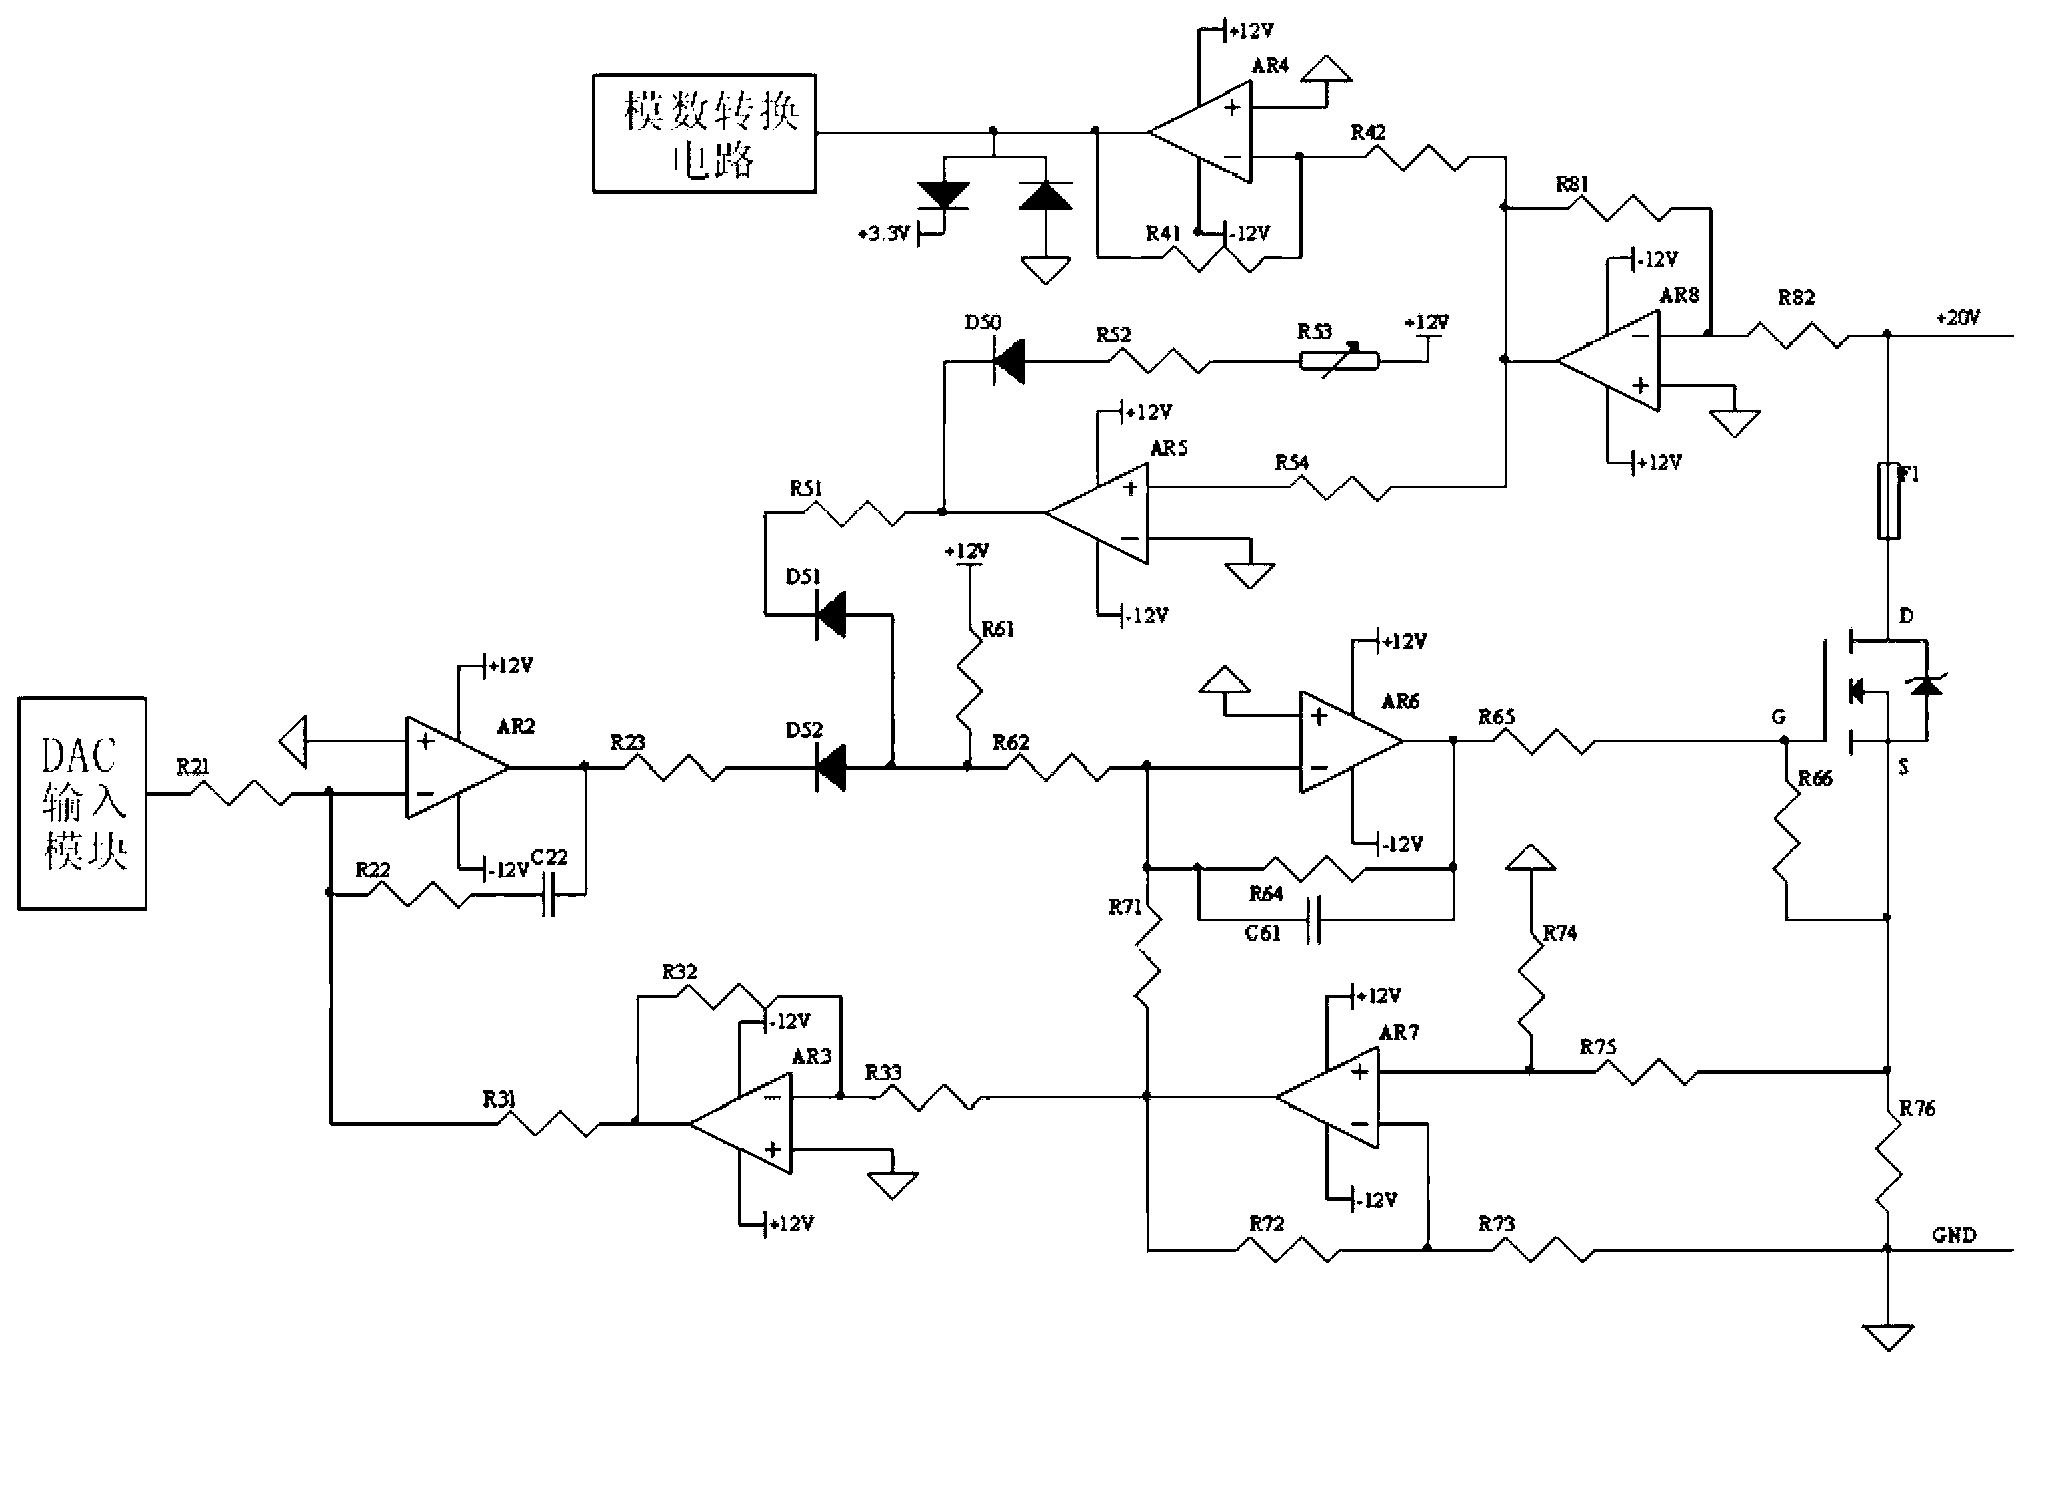 Electrical fire detector based on temperature detection